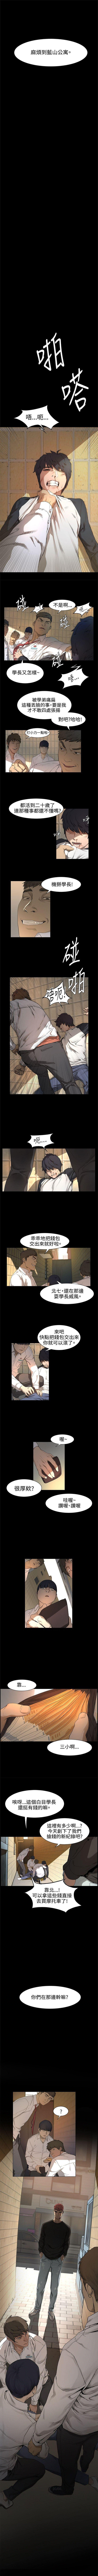 Cop 衝突 1-113 官方中文（連載中） Blows - Page 5